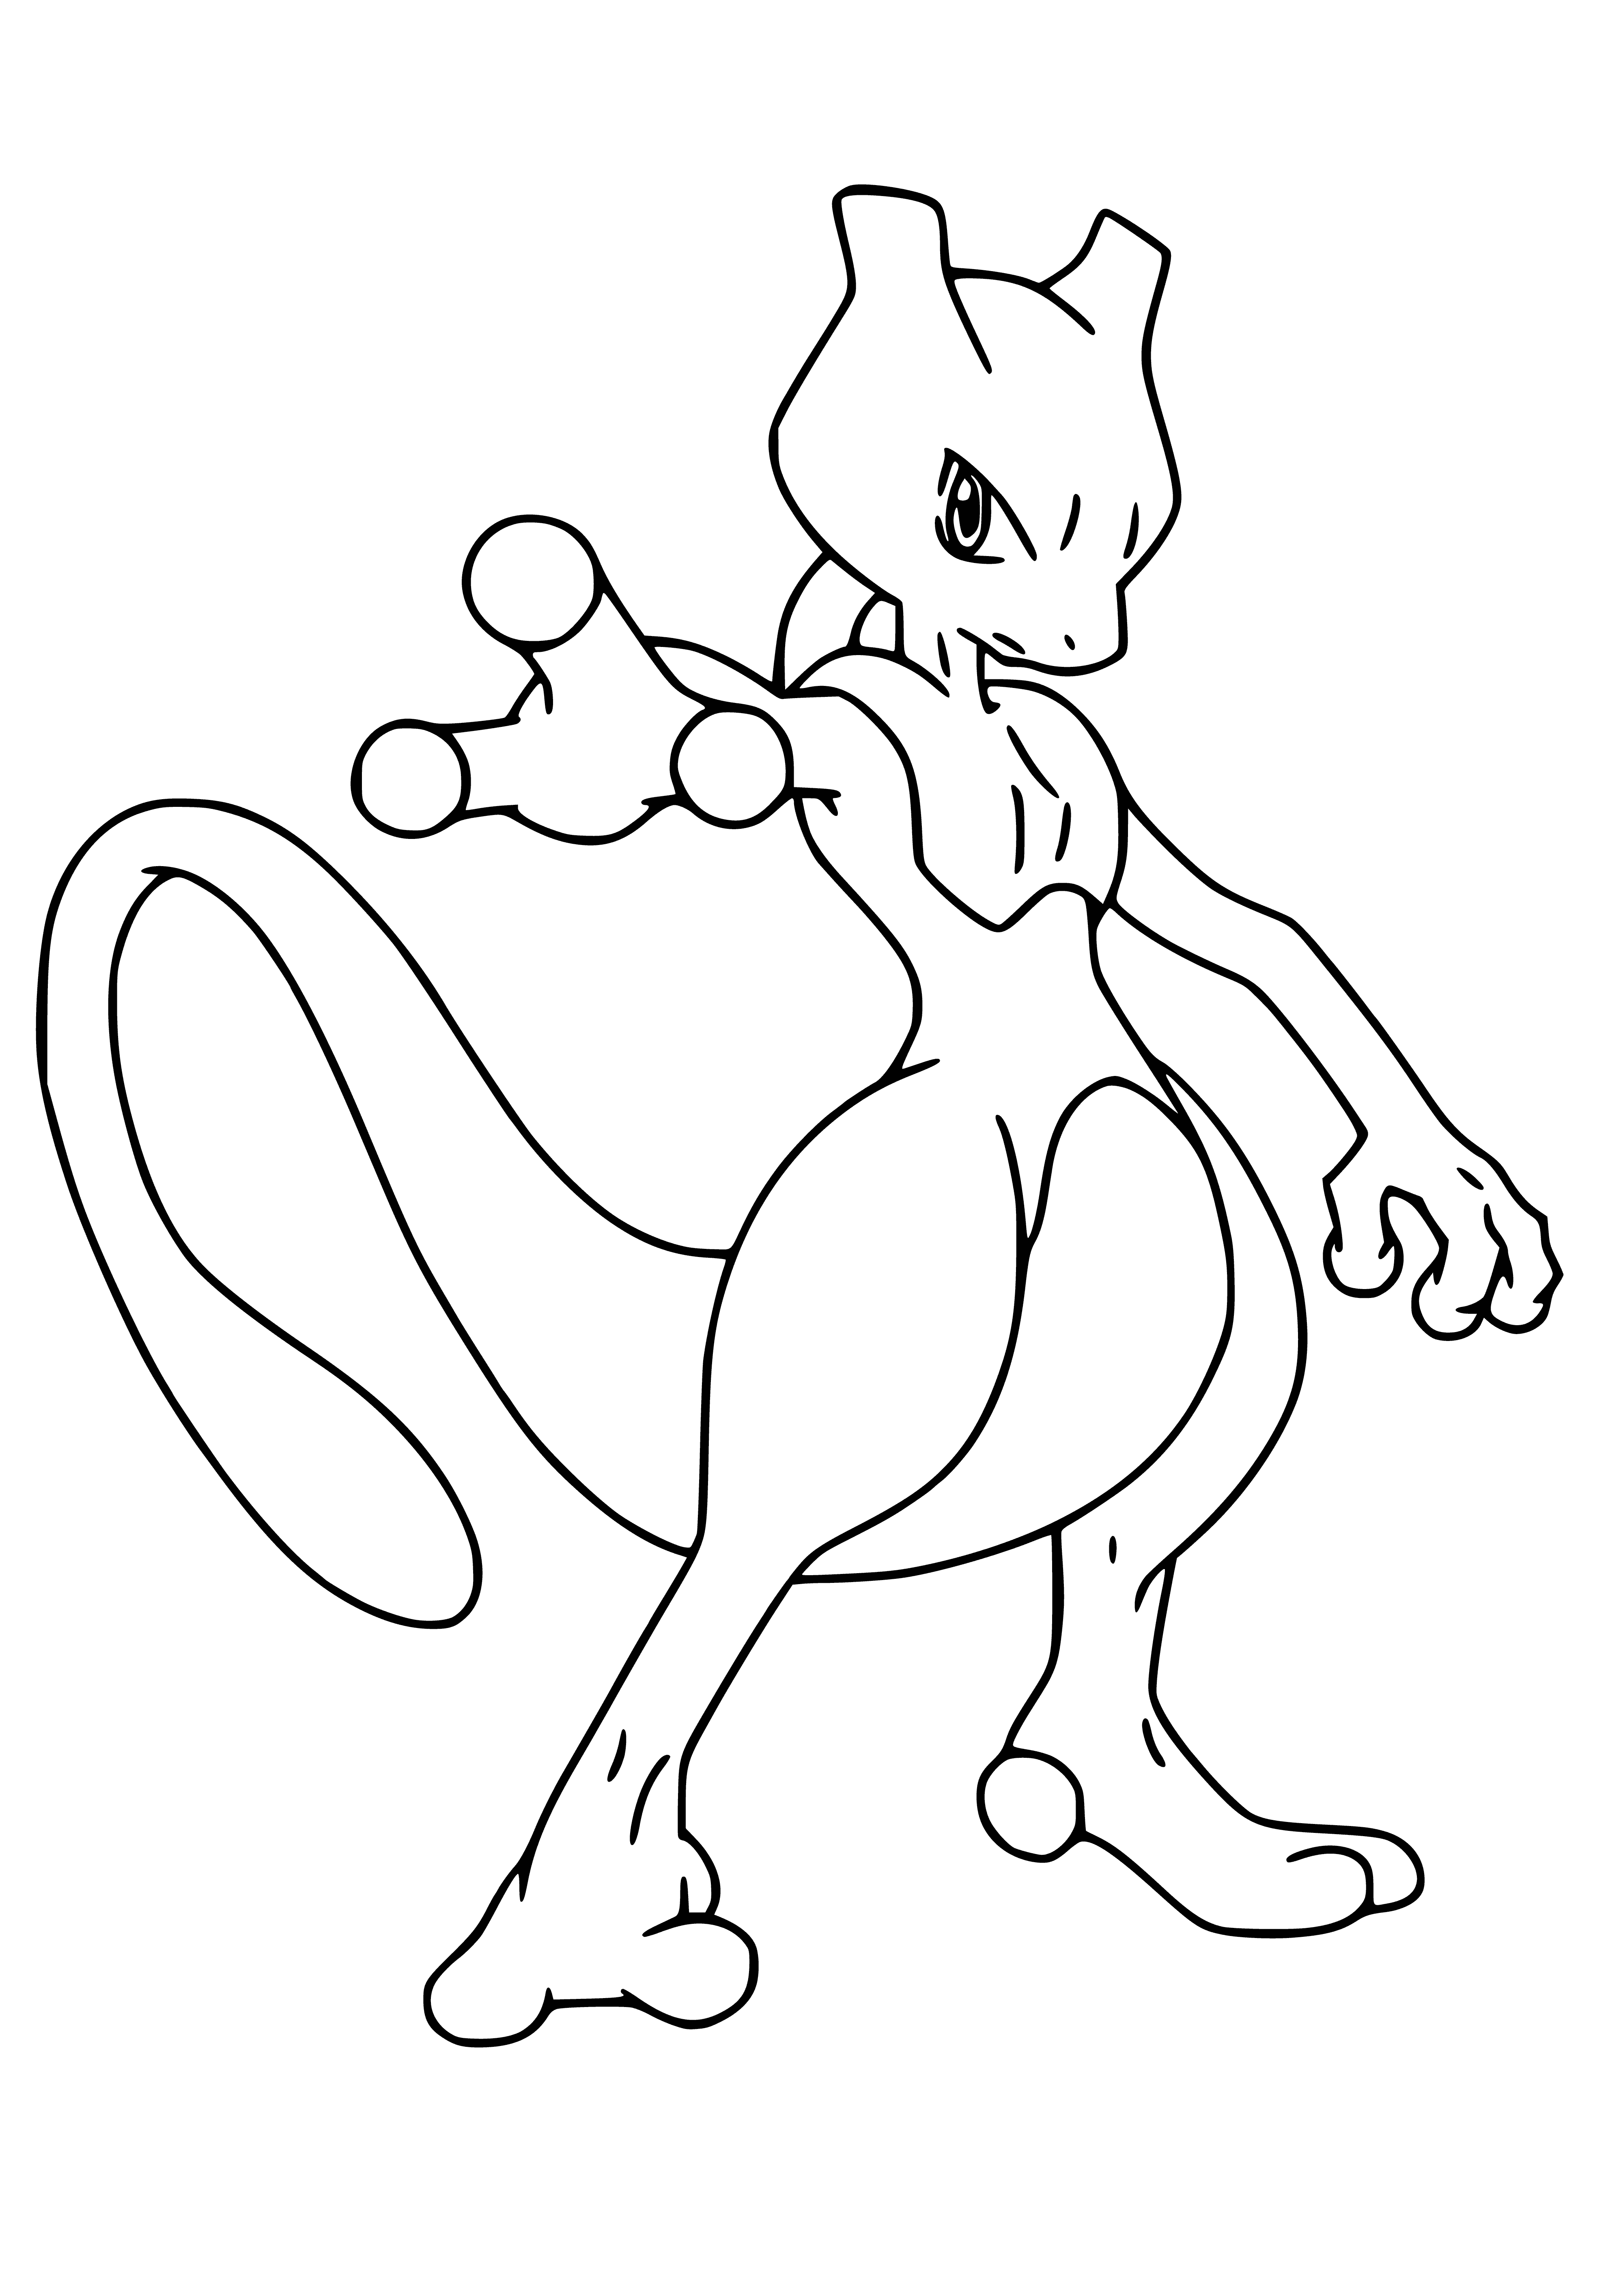 Legendary Pokemon Mewtwo coloring page